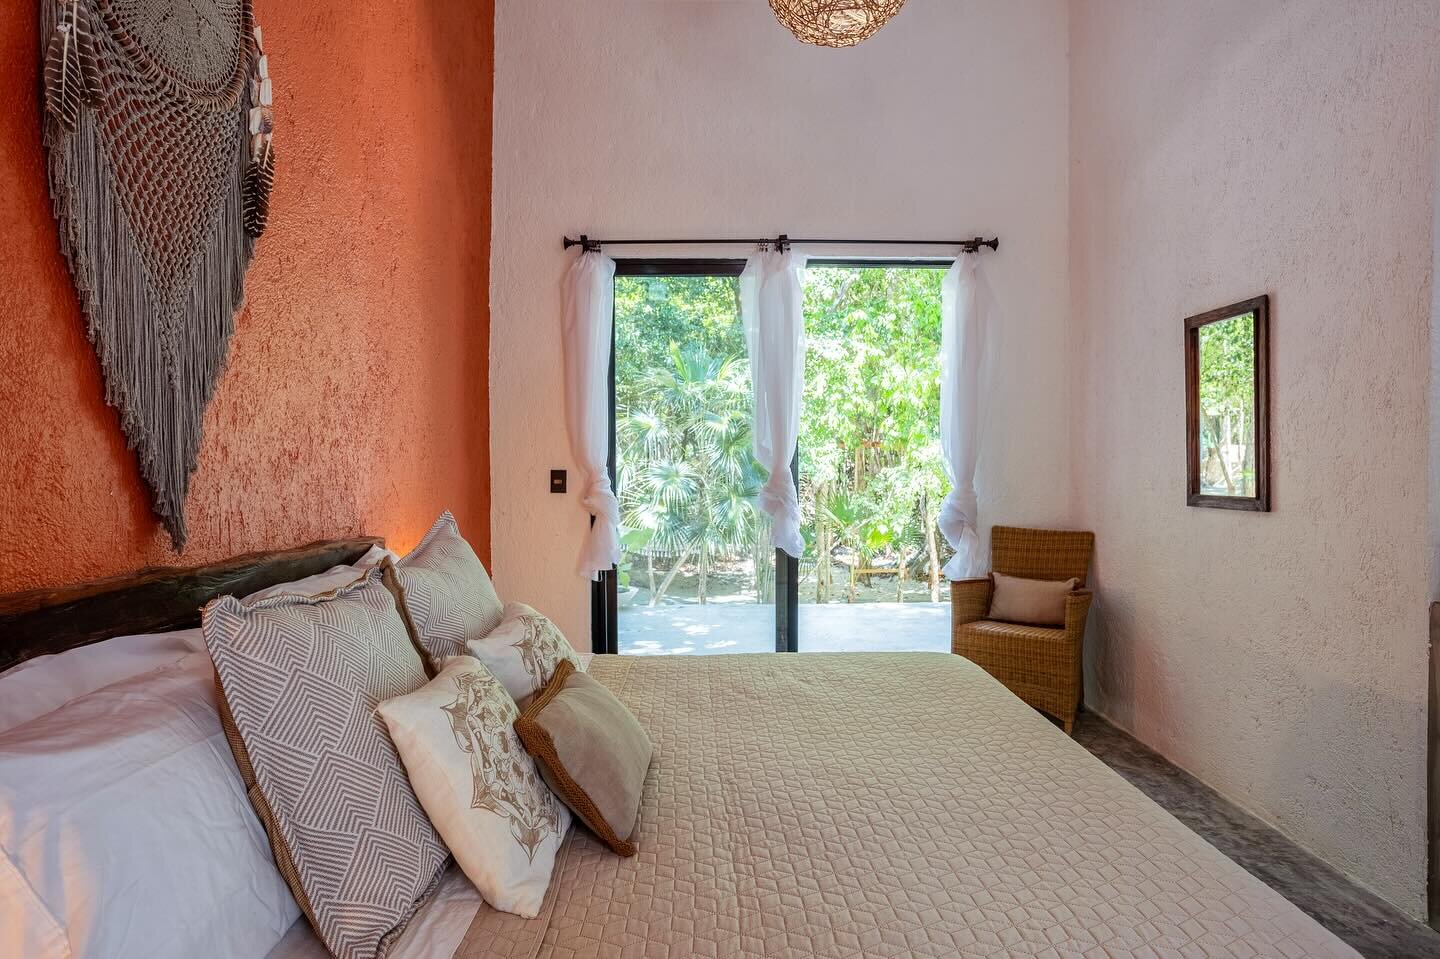 There&rsquo;s no feeling quite like waking up in the magical Mayan jungle of Tulum, Mexico 🌱✨

Contact us today for availability and our inclusive group offerings! 

Info@tulilitulum.com 

-

#tulum #tulummexico #mexico #privatehome #ecofriendly #ec